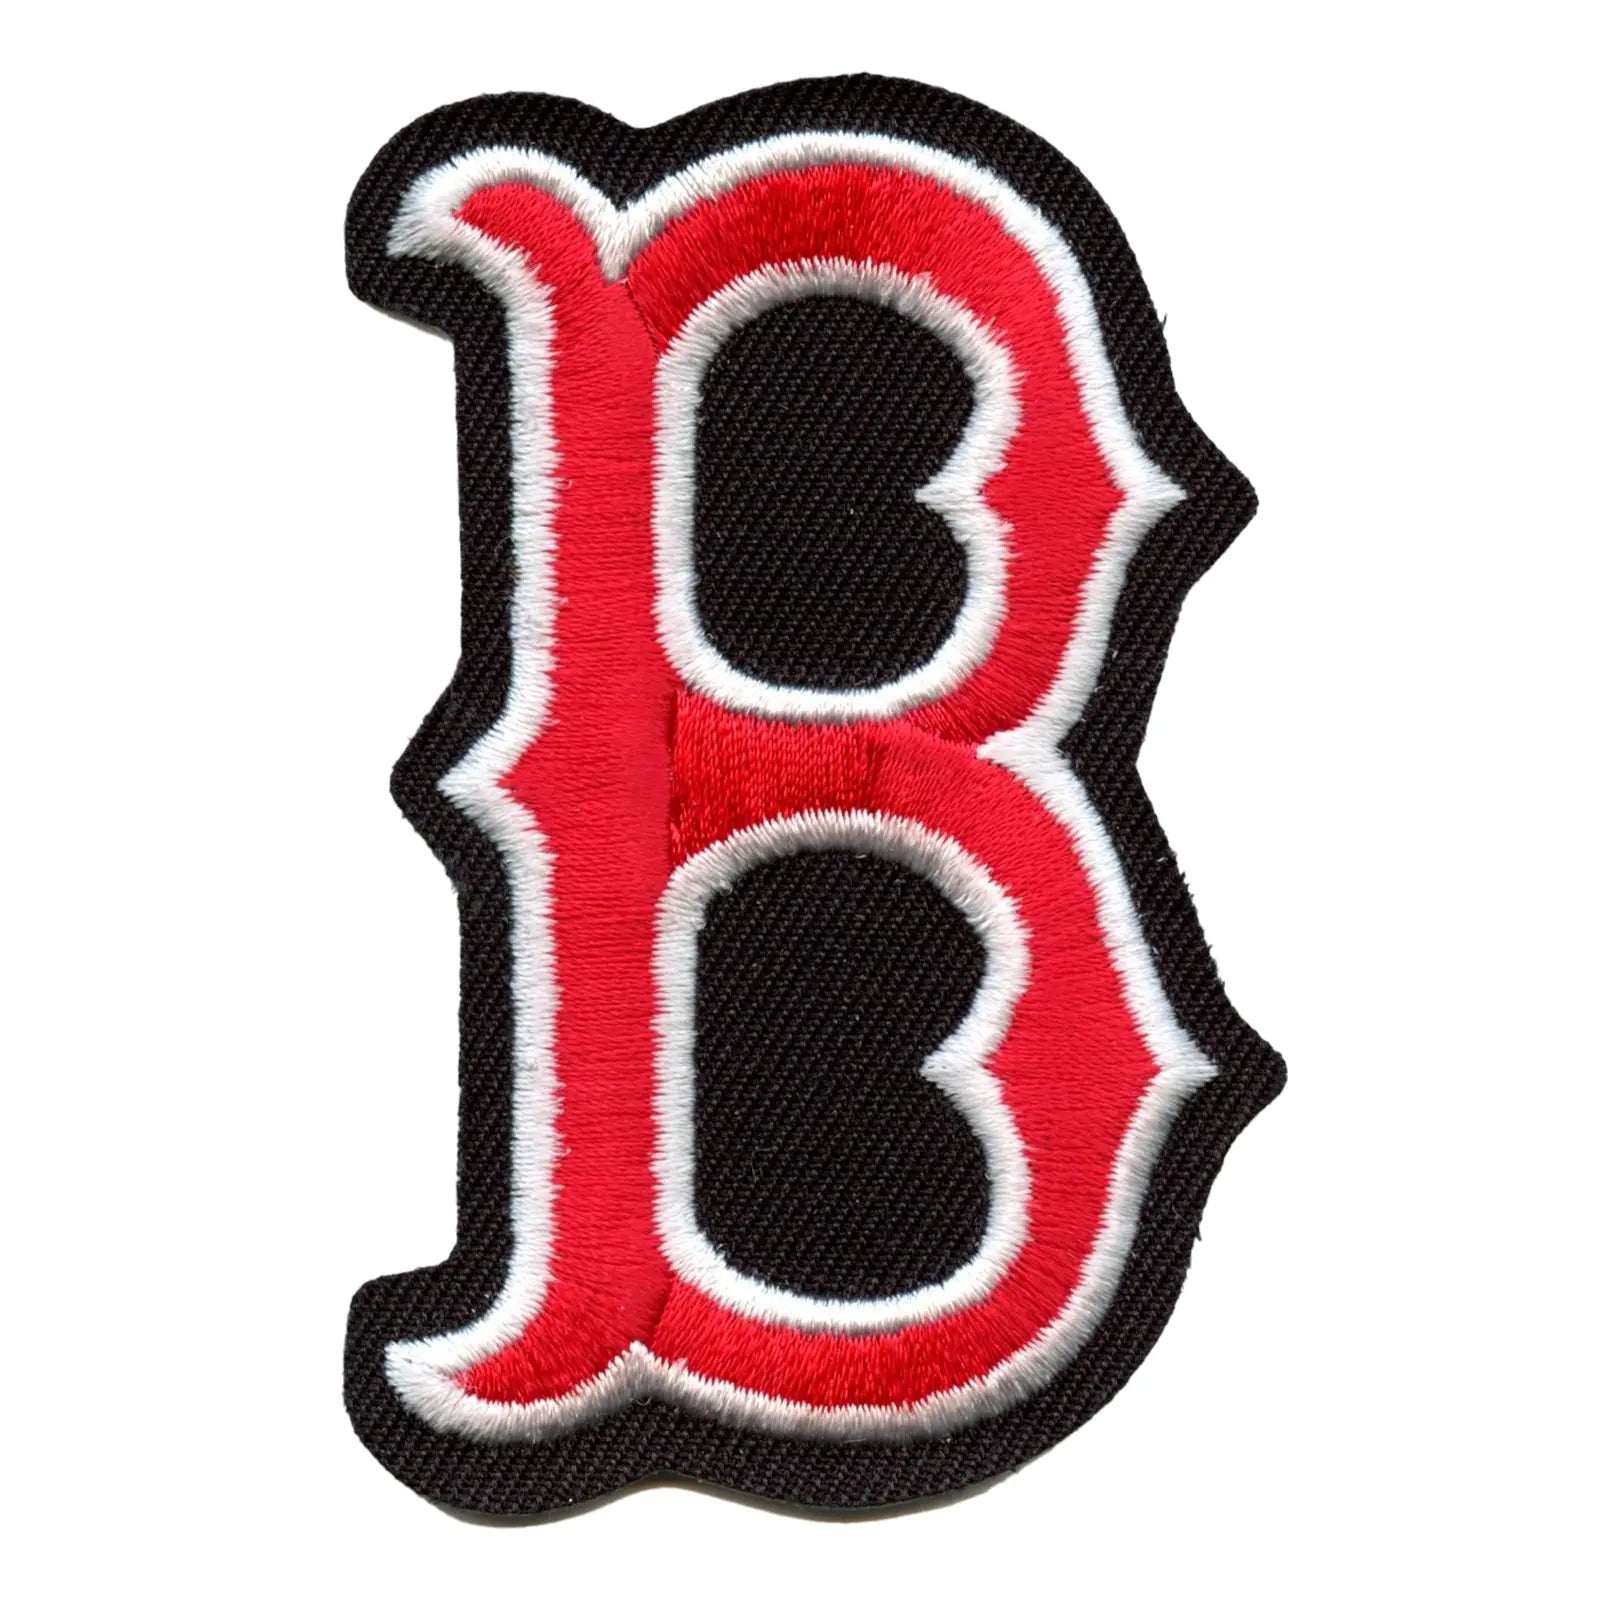 Boston+Red+Sox+Small+Letter+B+Hat+Logo+Embroidered+Iron+on+Patch+2%22 for  sale online